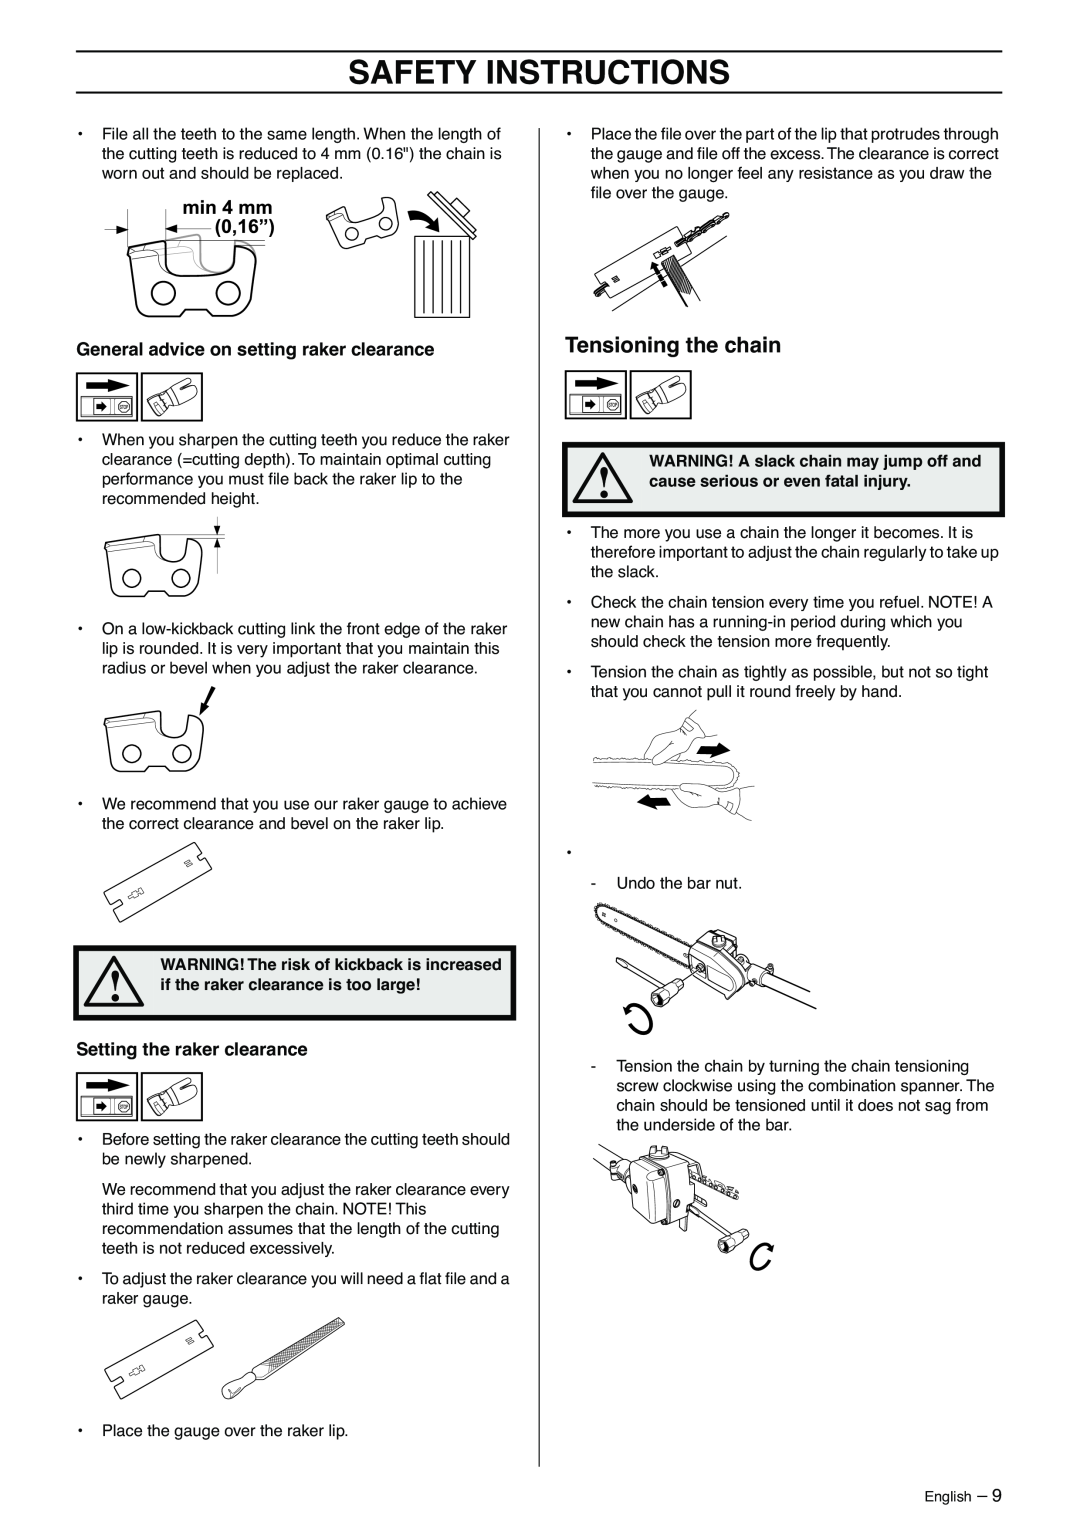 Husqvarna 323P4, 325P5 manual Safety Instructions, Tensioning the chain, General advice on setting raker clearance 